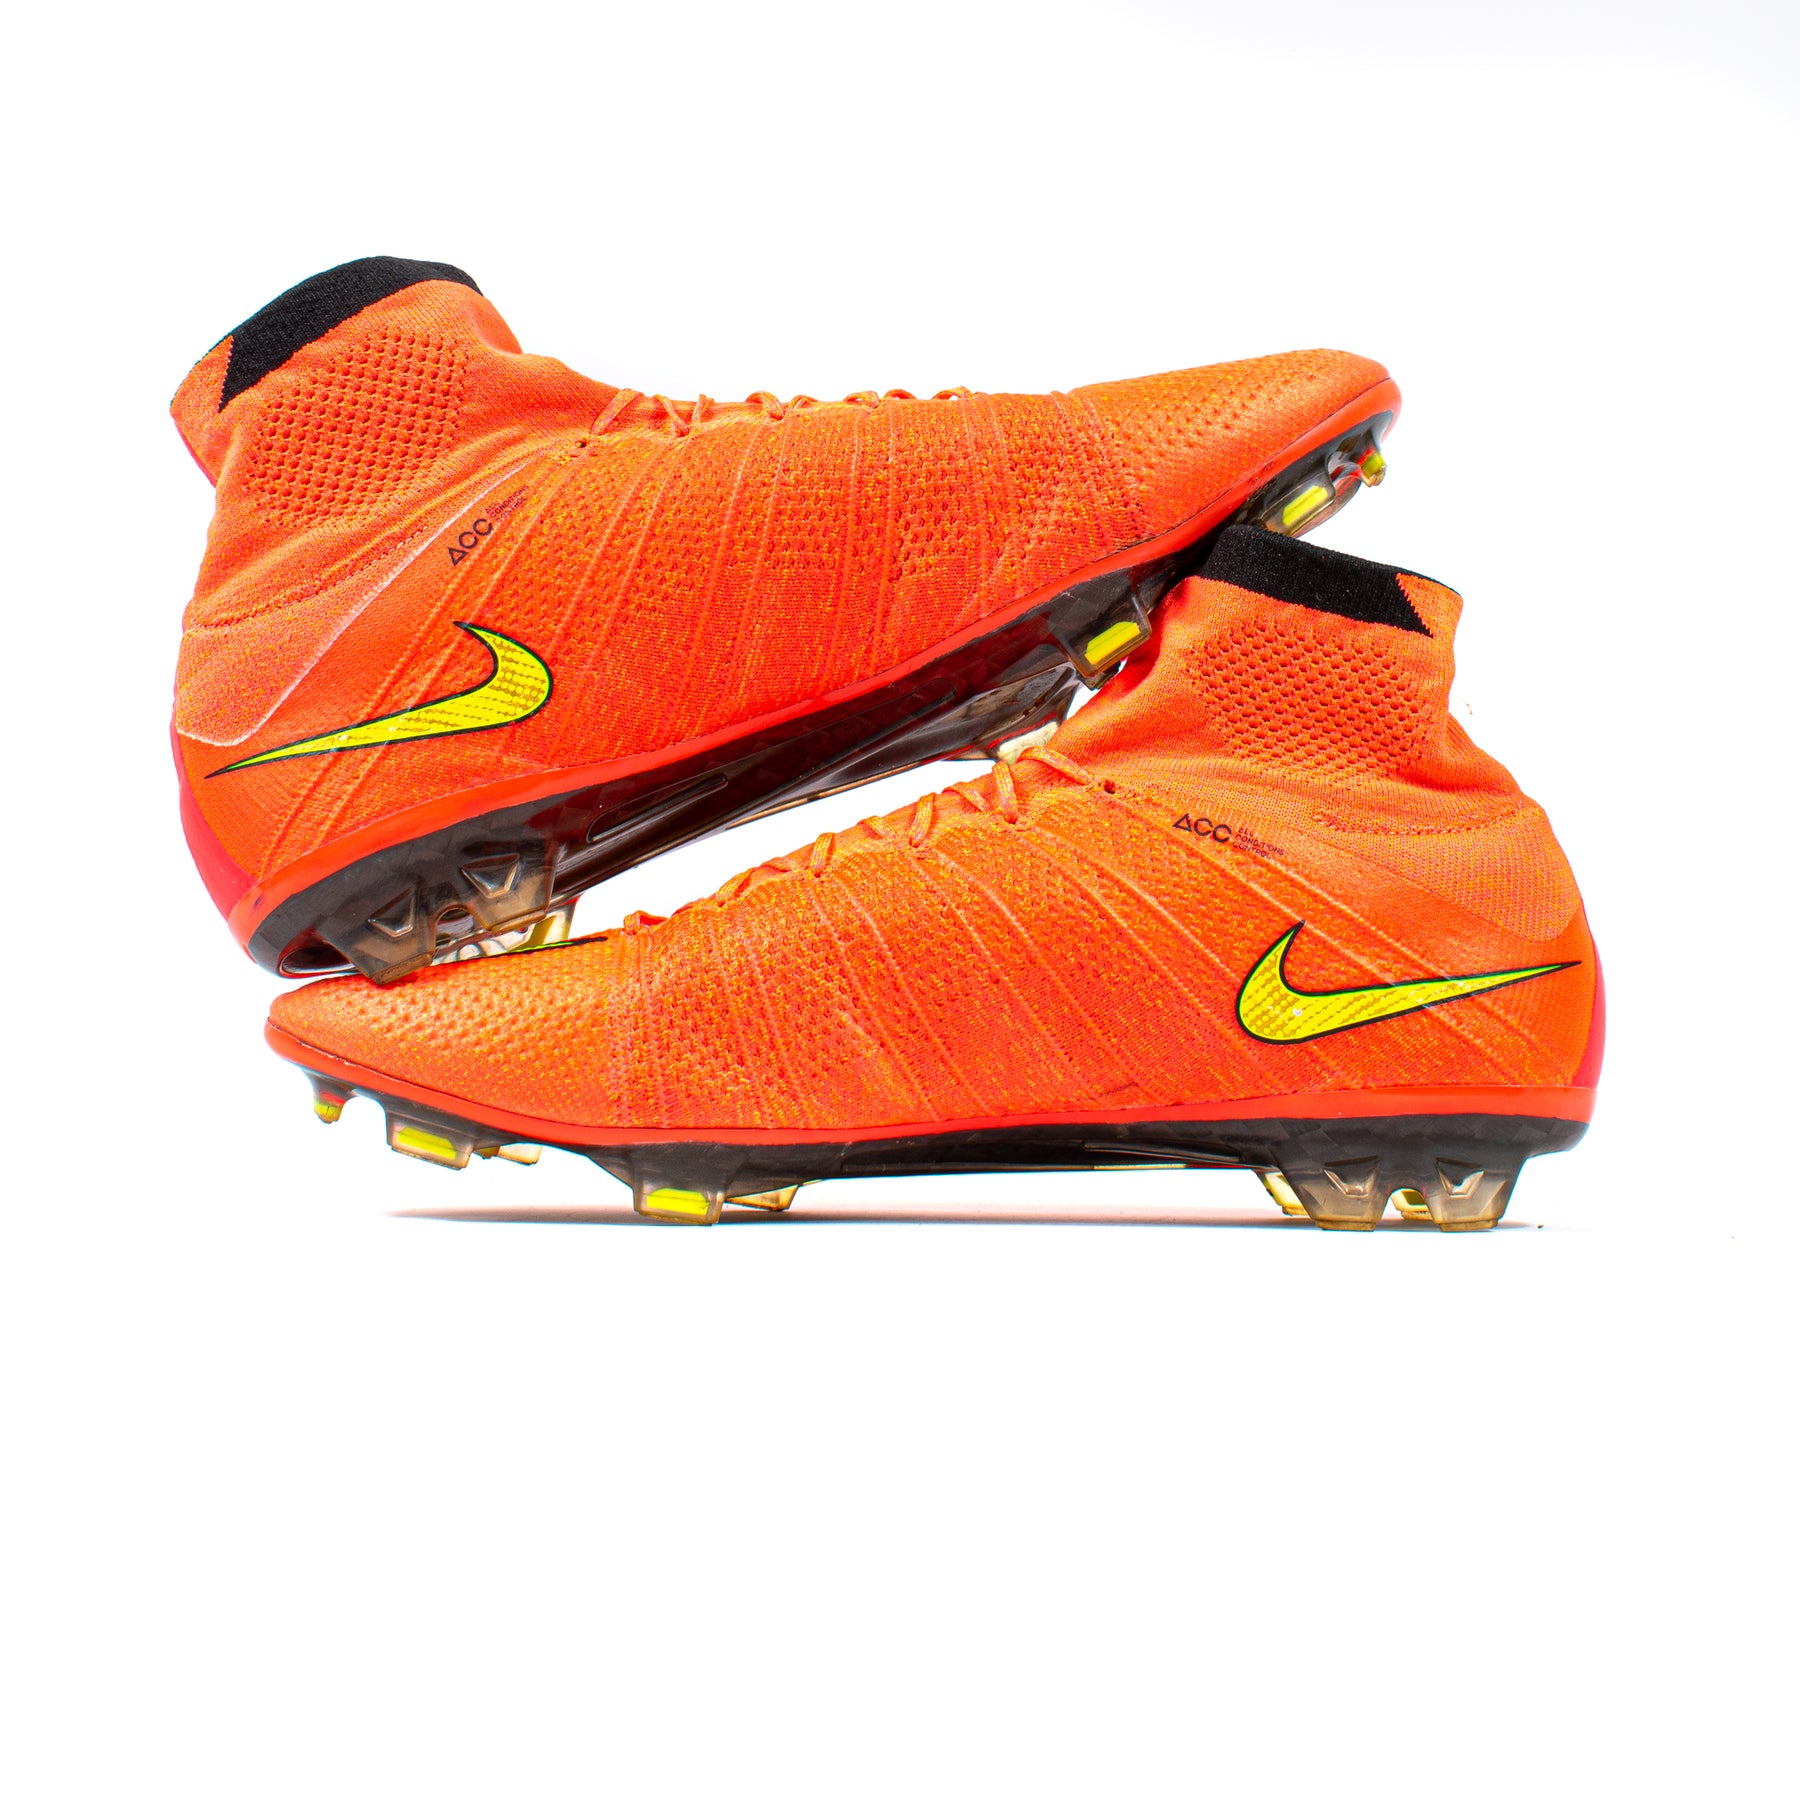 morgenmad Mindst cigar Nike Mercurial Vapor Superfly IV World Cup FG – Classic Soccer Cleats